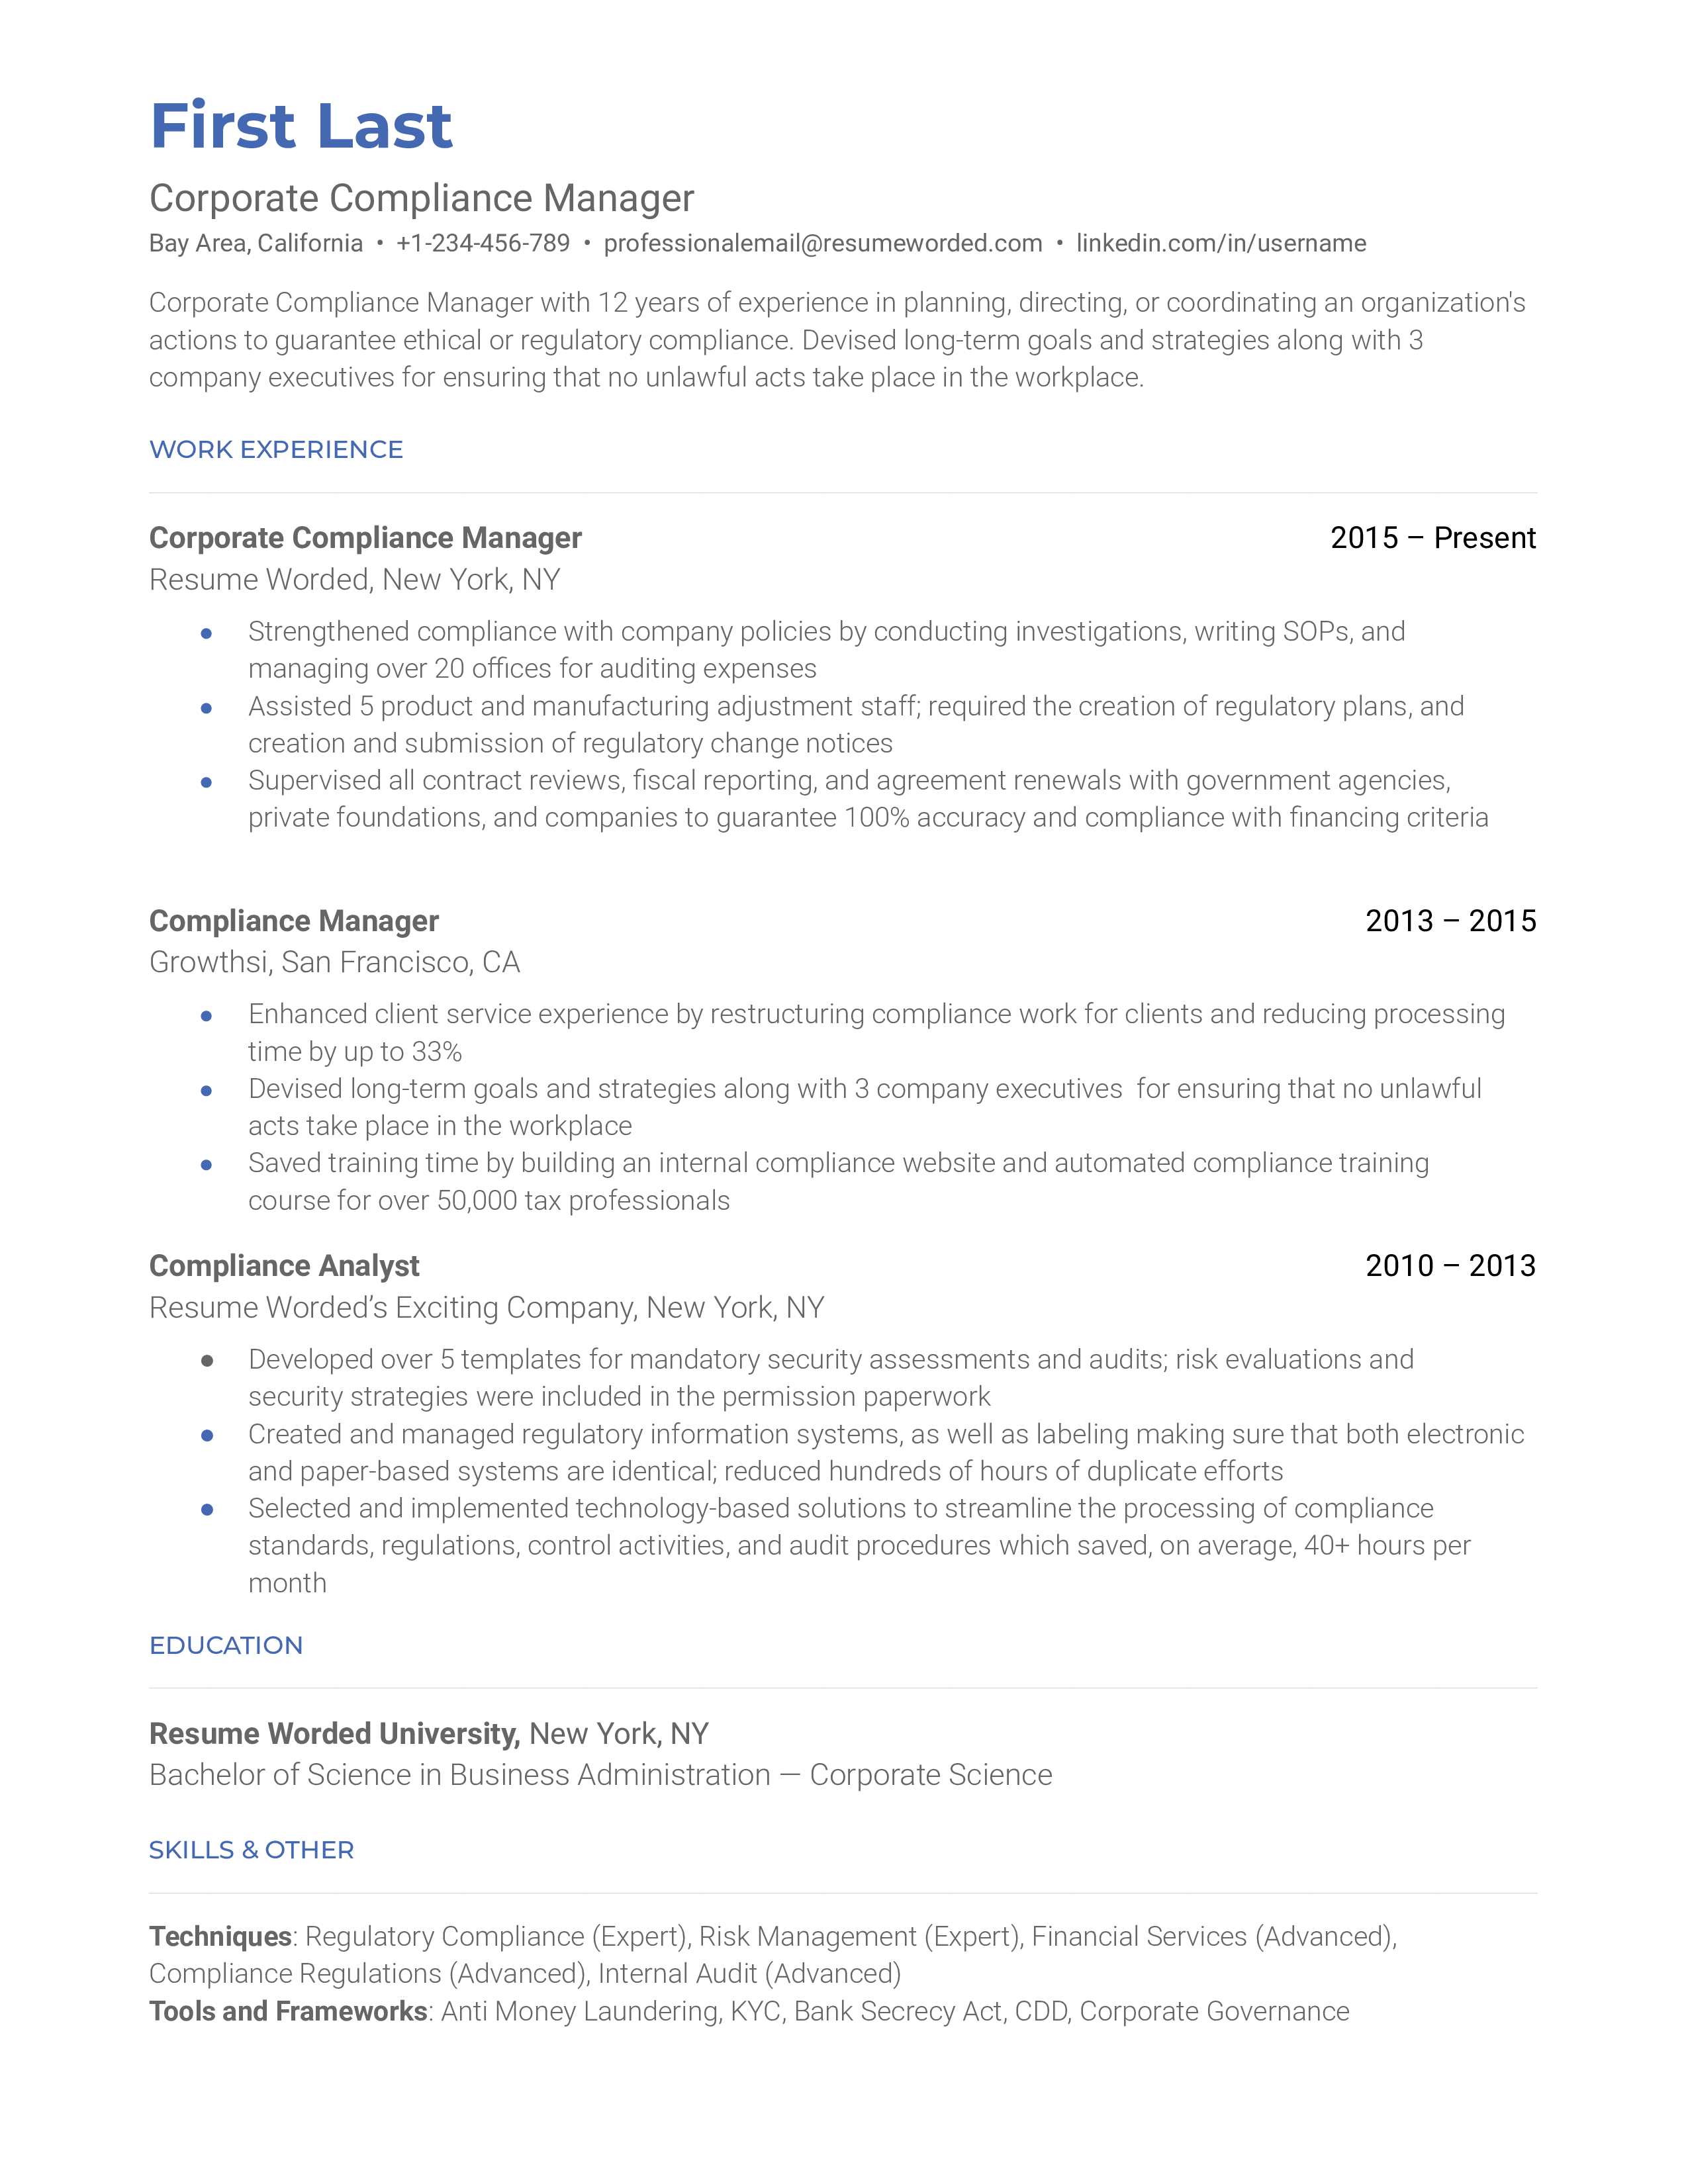 Corporate compliance manager resume example